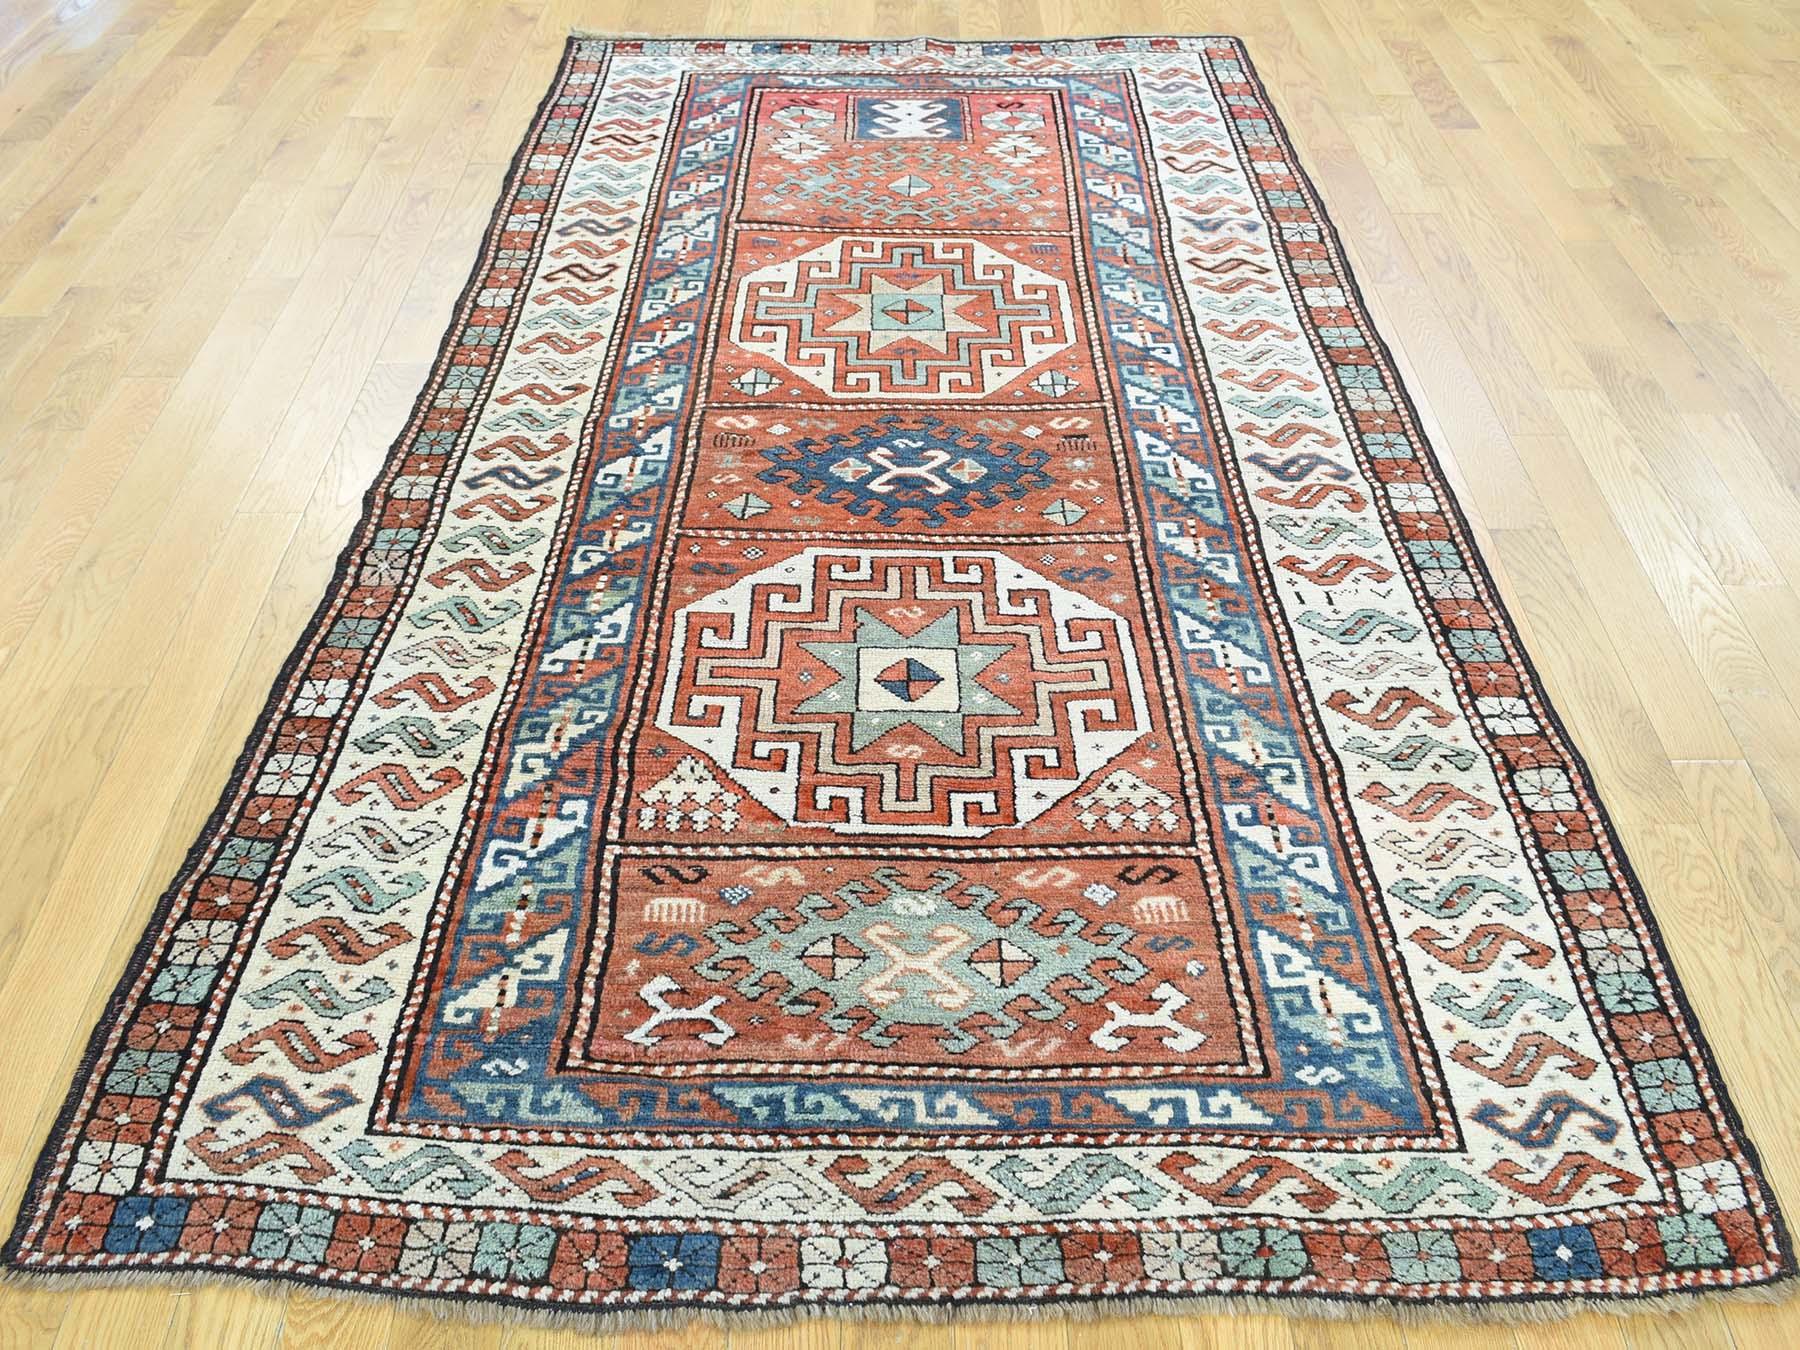 This is a genuine hand knotted Oriental rug. It is not hand tufted or machine made rug. Our entire inventory is made of either hand knotted or handwoven rugs.

Enhance your home with this magnificent antique carpet. This handcrafted Caucasian